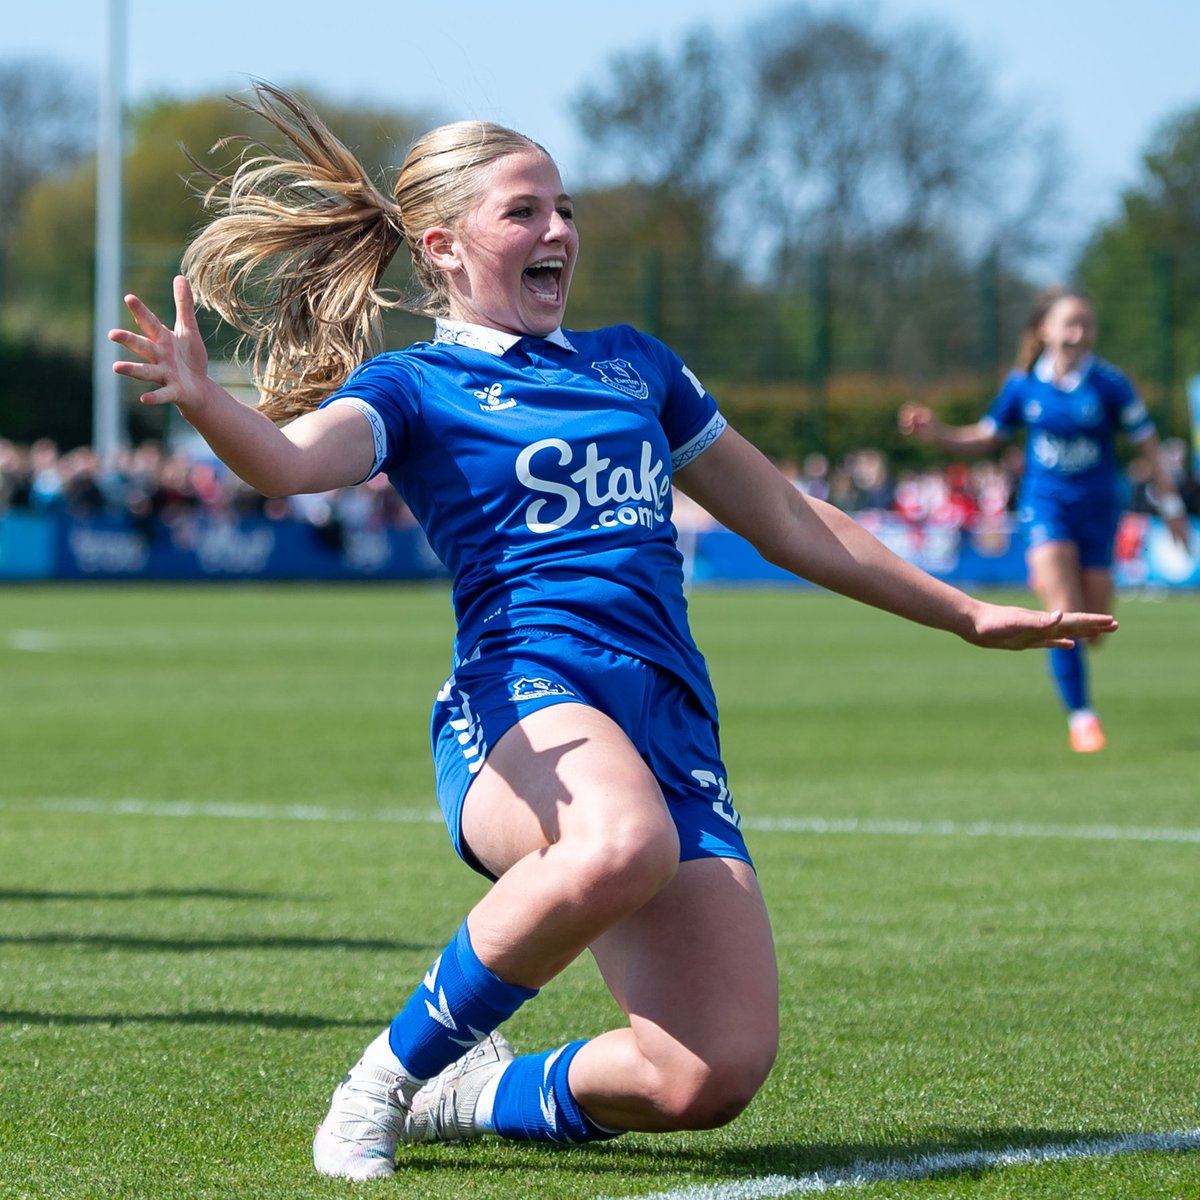 ⚽️ Youngest-ever @BarclaysWSL goalscorer 🔵 Youngest Everton Women goalscorer in 14 years 🙌 First WSL point against Arsenal since 2012 A historic day. 🤩